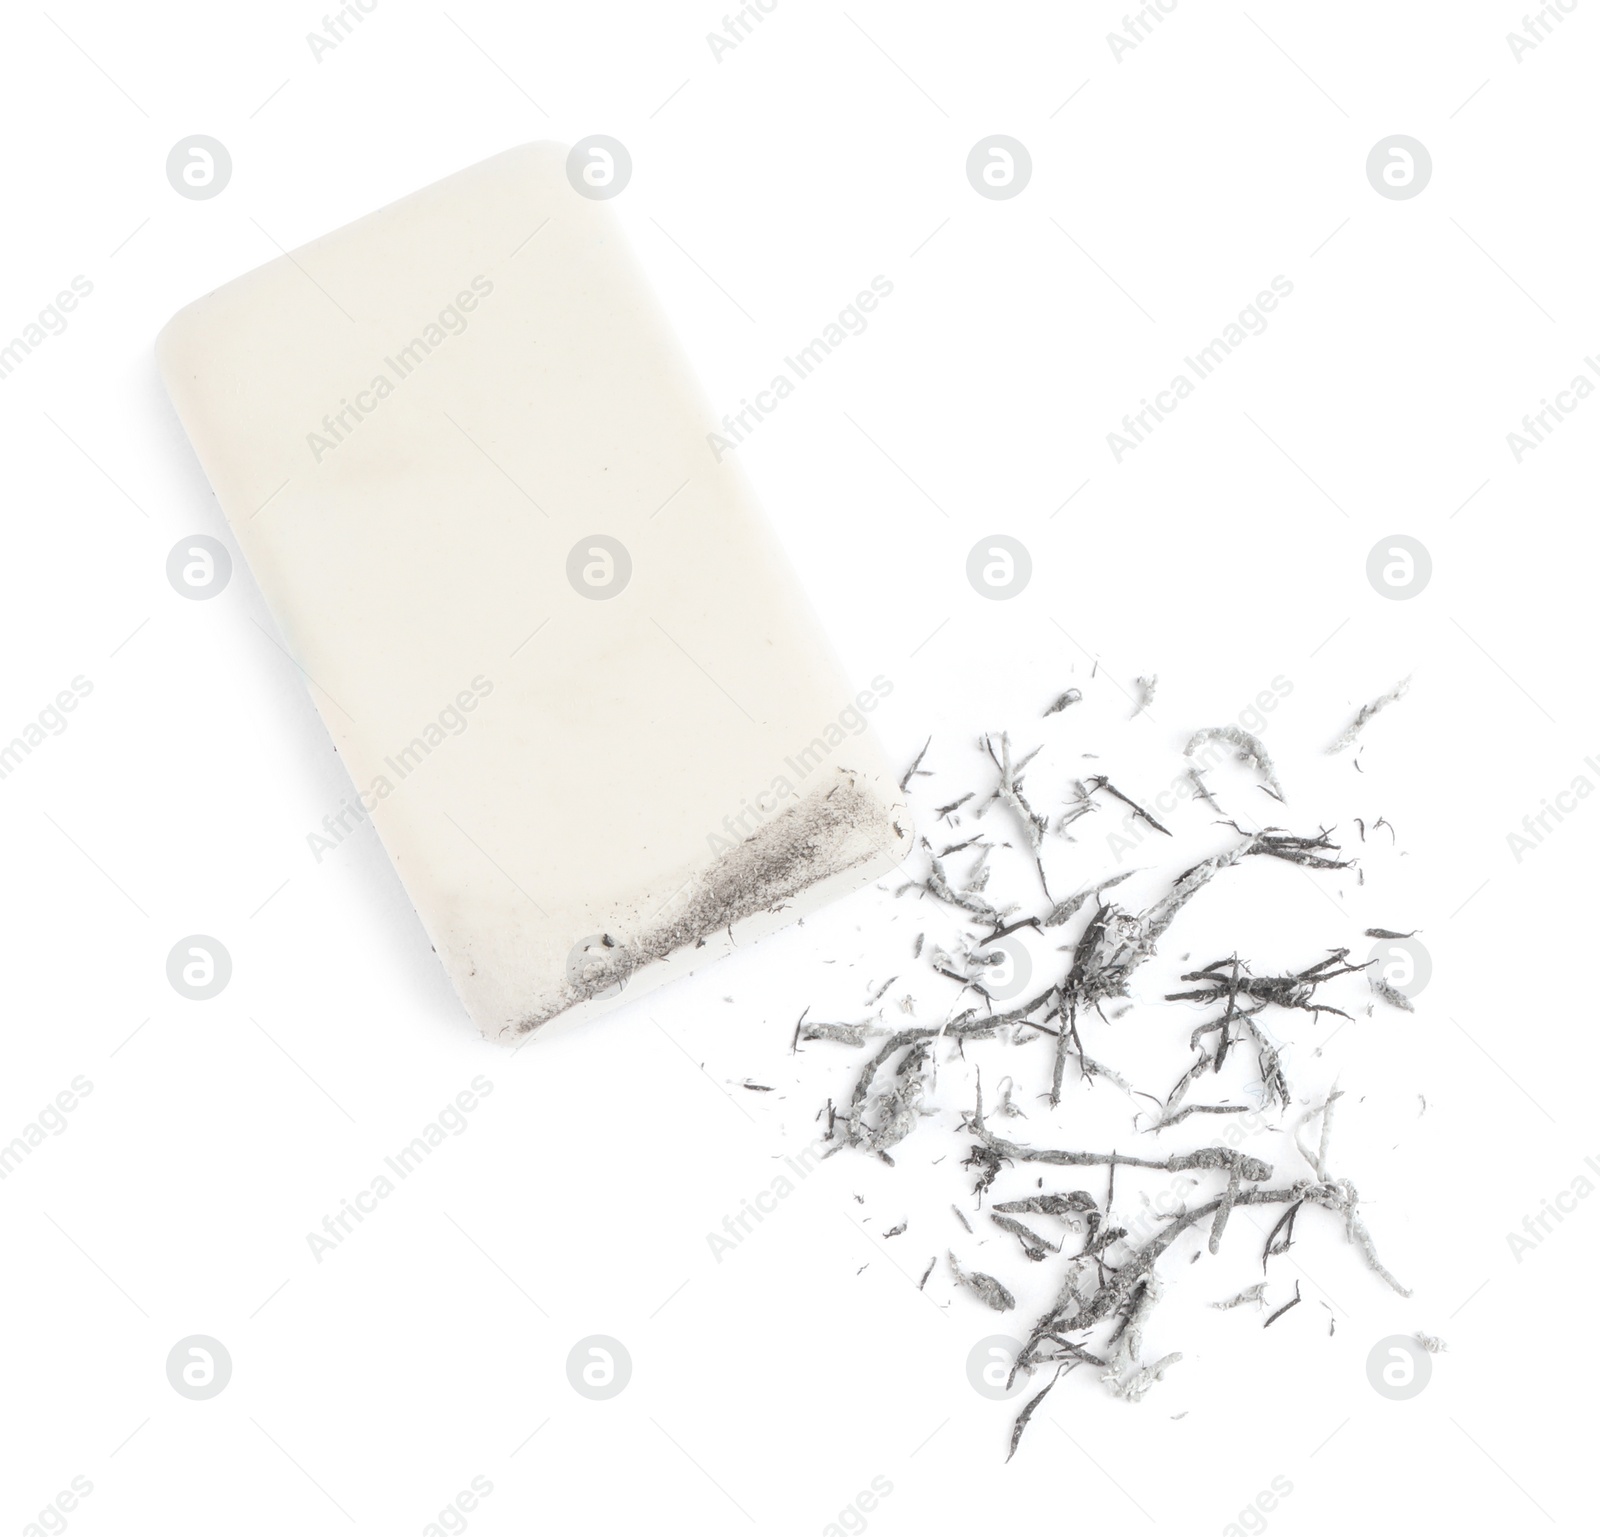 Photo of Eraser and crumbs on white background, top view